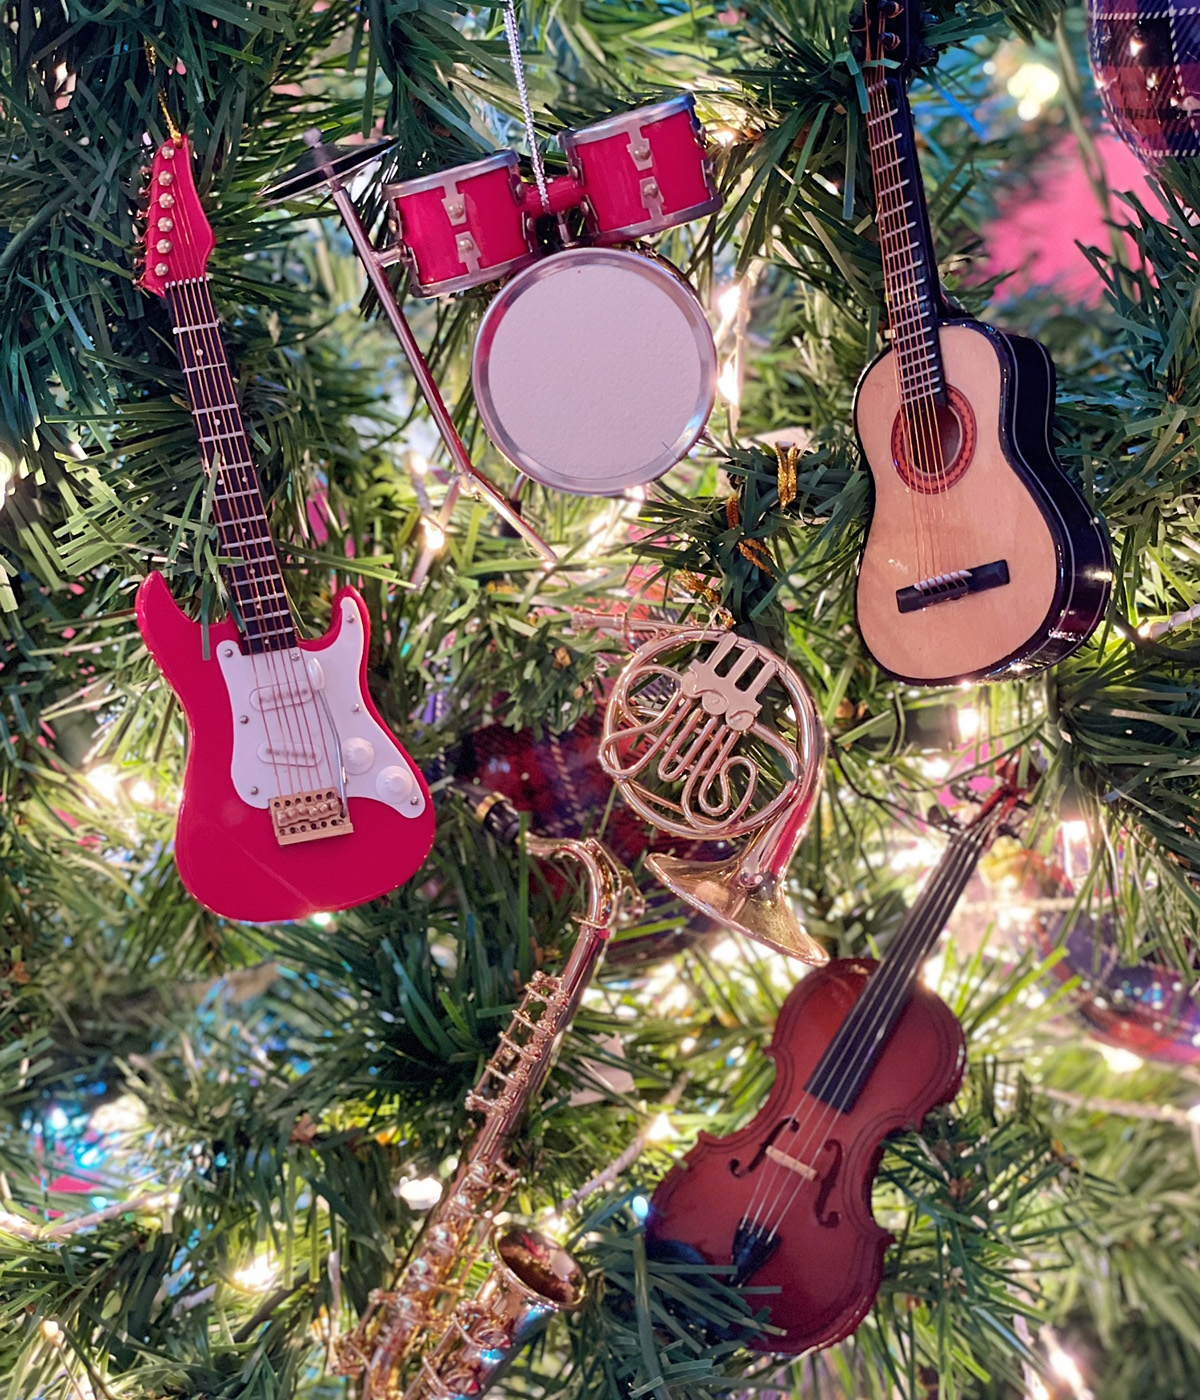 Musical Ornaments such as guitars, drums, violin